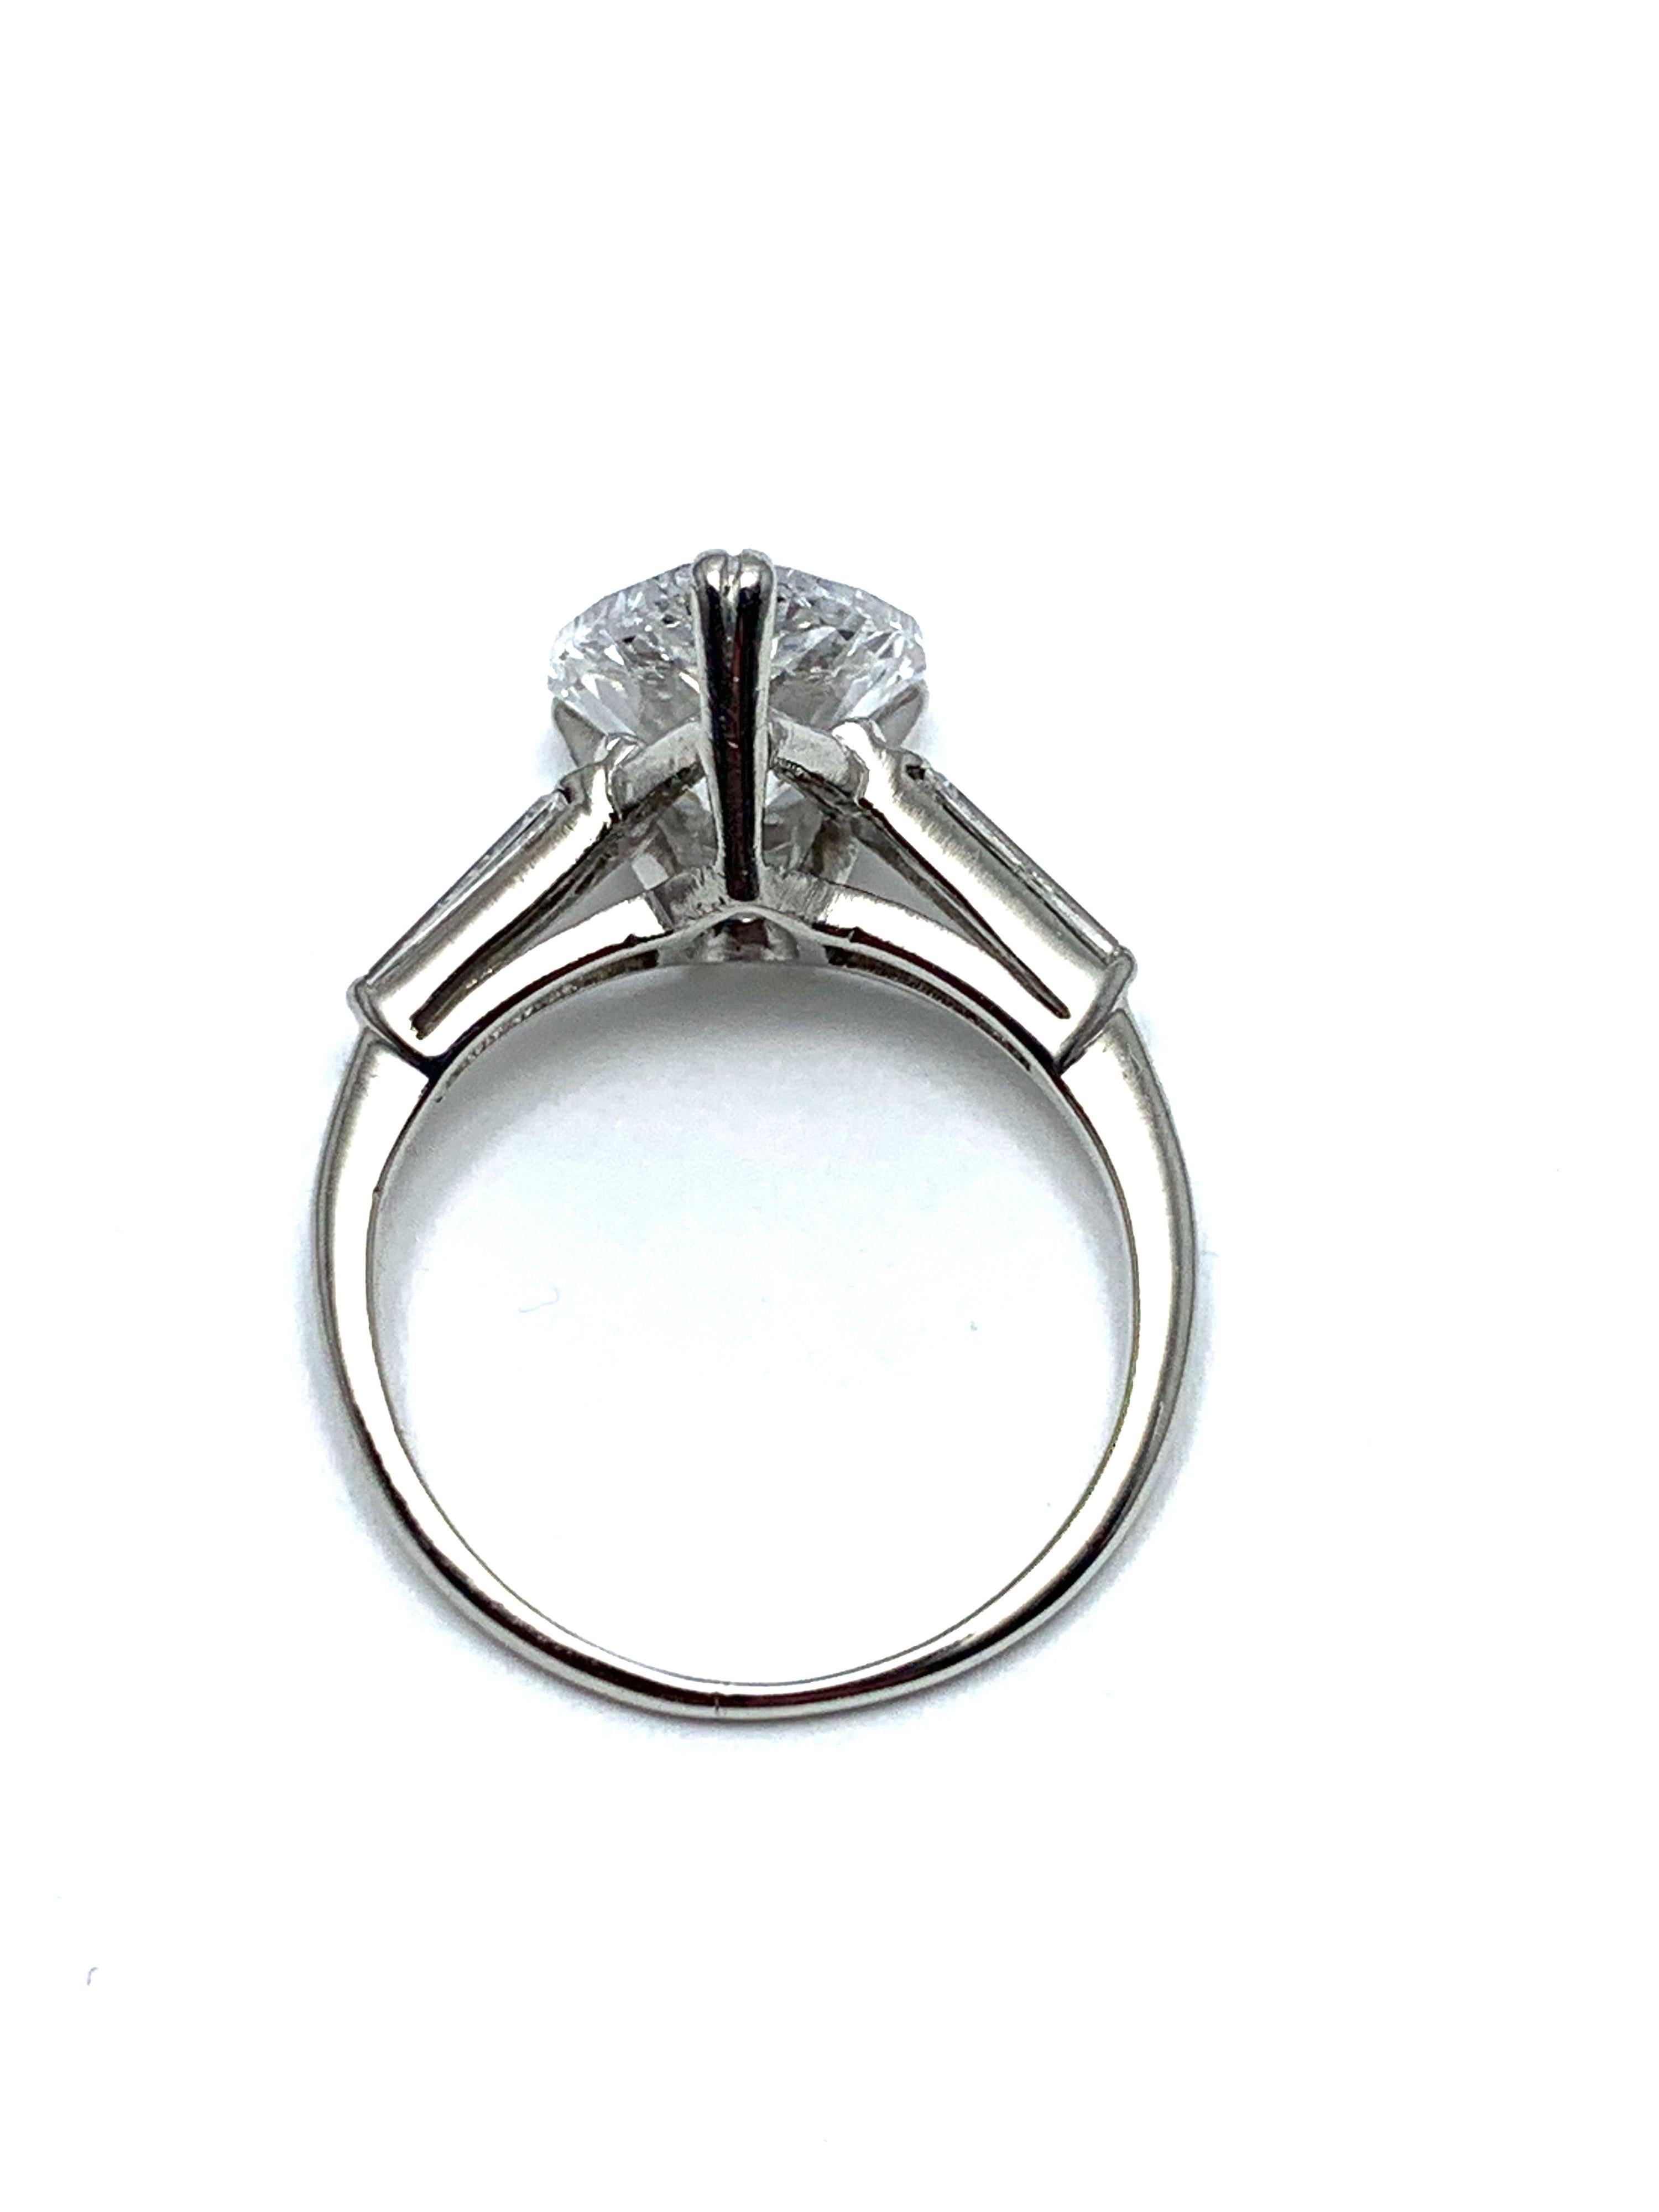 3.14 Carat D SI1 Pear Shape Diamond and Baguette Diamond Platinum Ring In Excellent Condition For Sale In Chevy Chase, MD